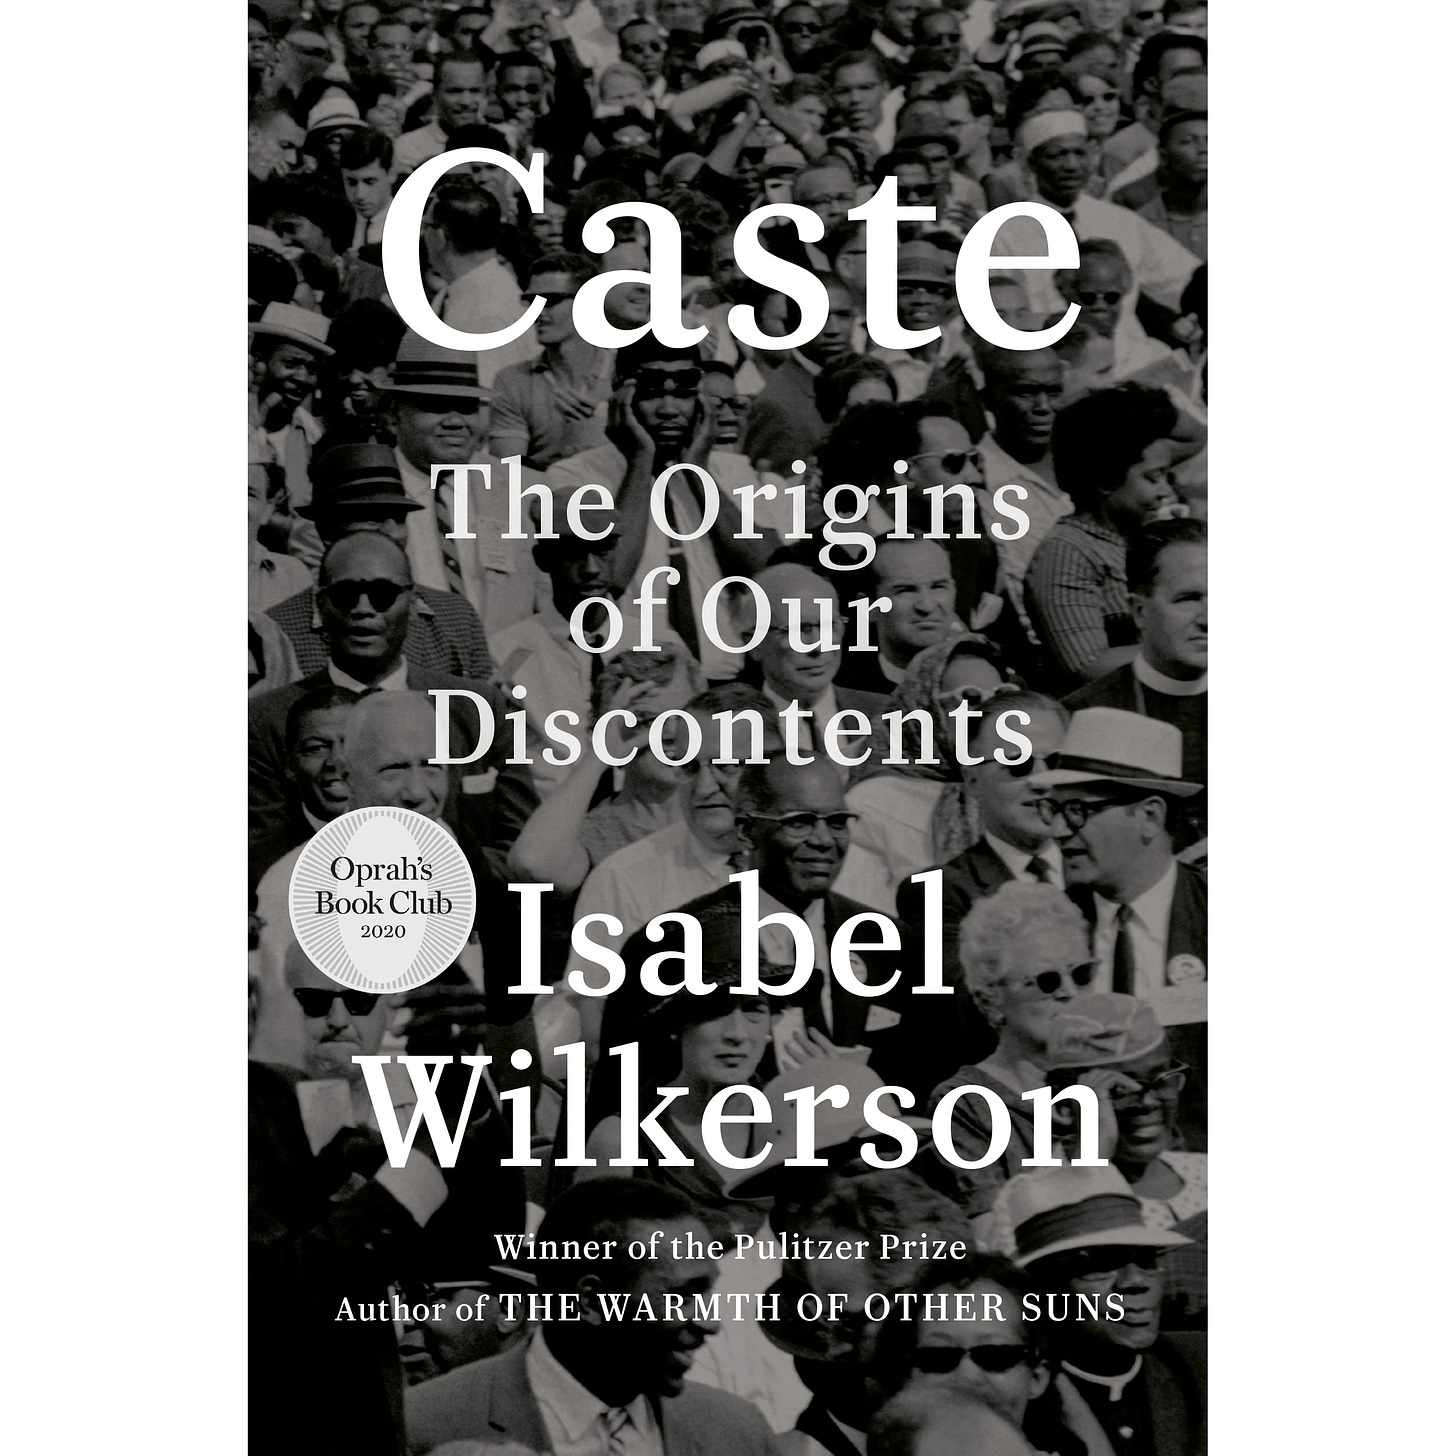 Caste: The Origins of Our Discontents by Isabel Wilkerson